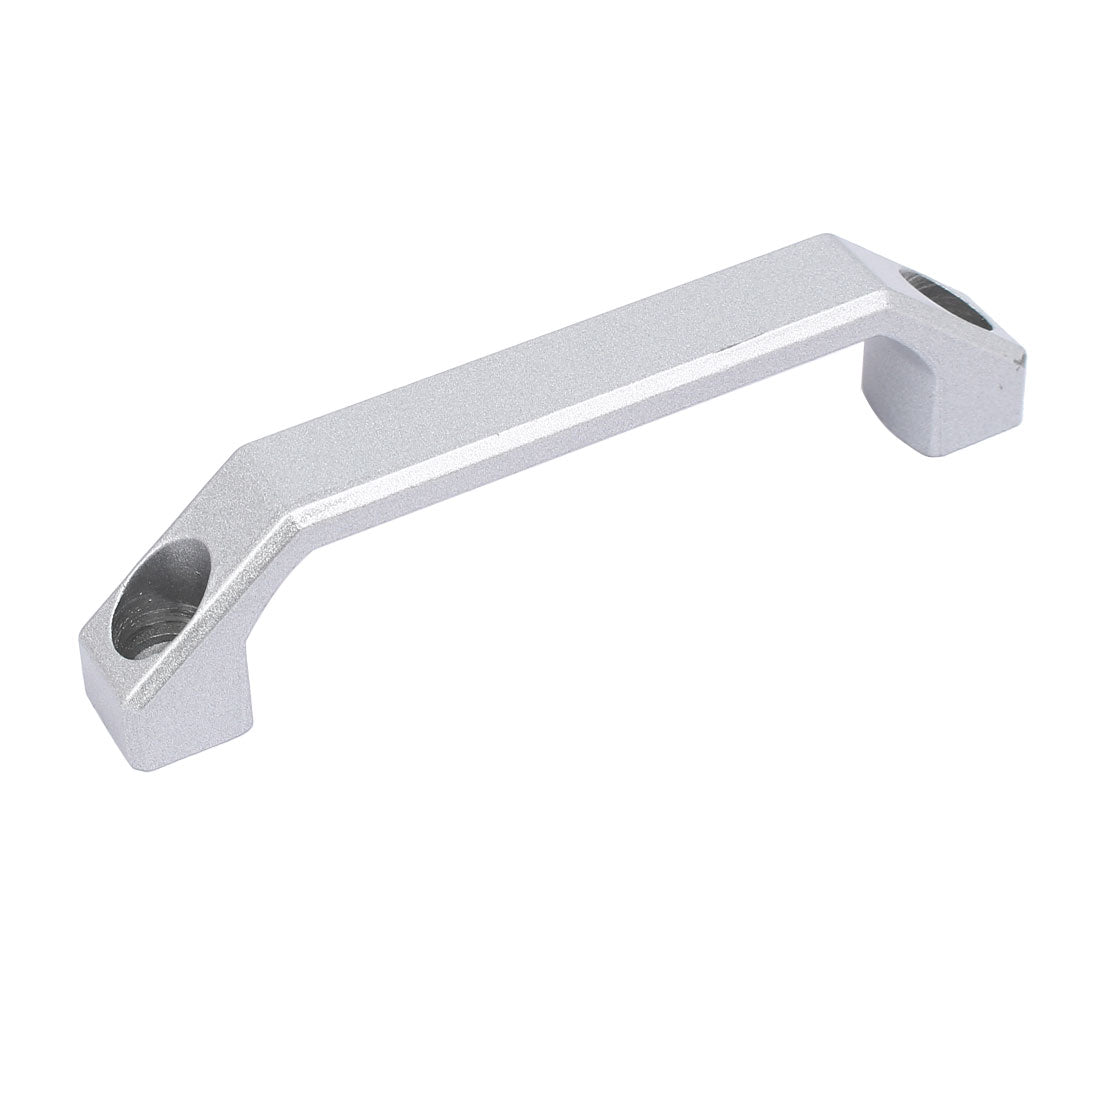 uxcell Uxcell Cabinet Door Drawer Metal Pull Handle Grip Silver Tone 120mm Hole Spacing